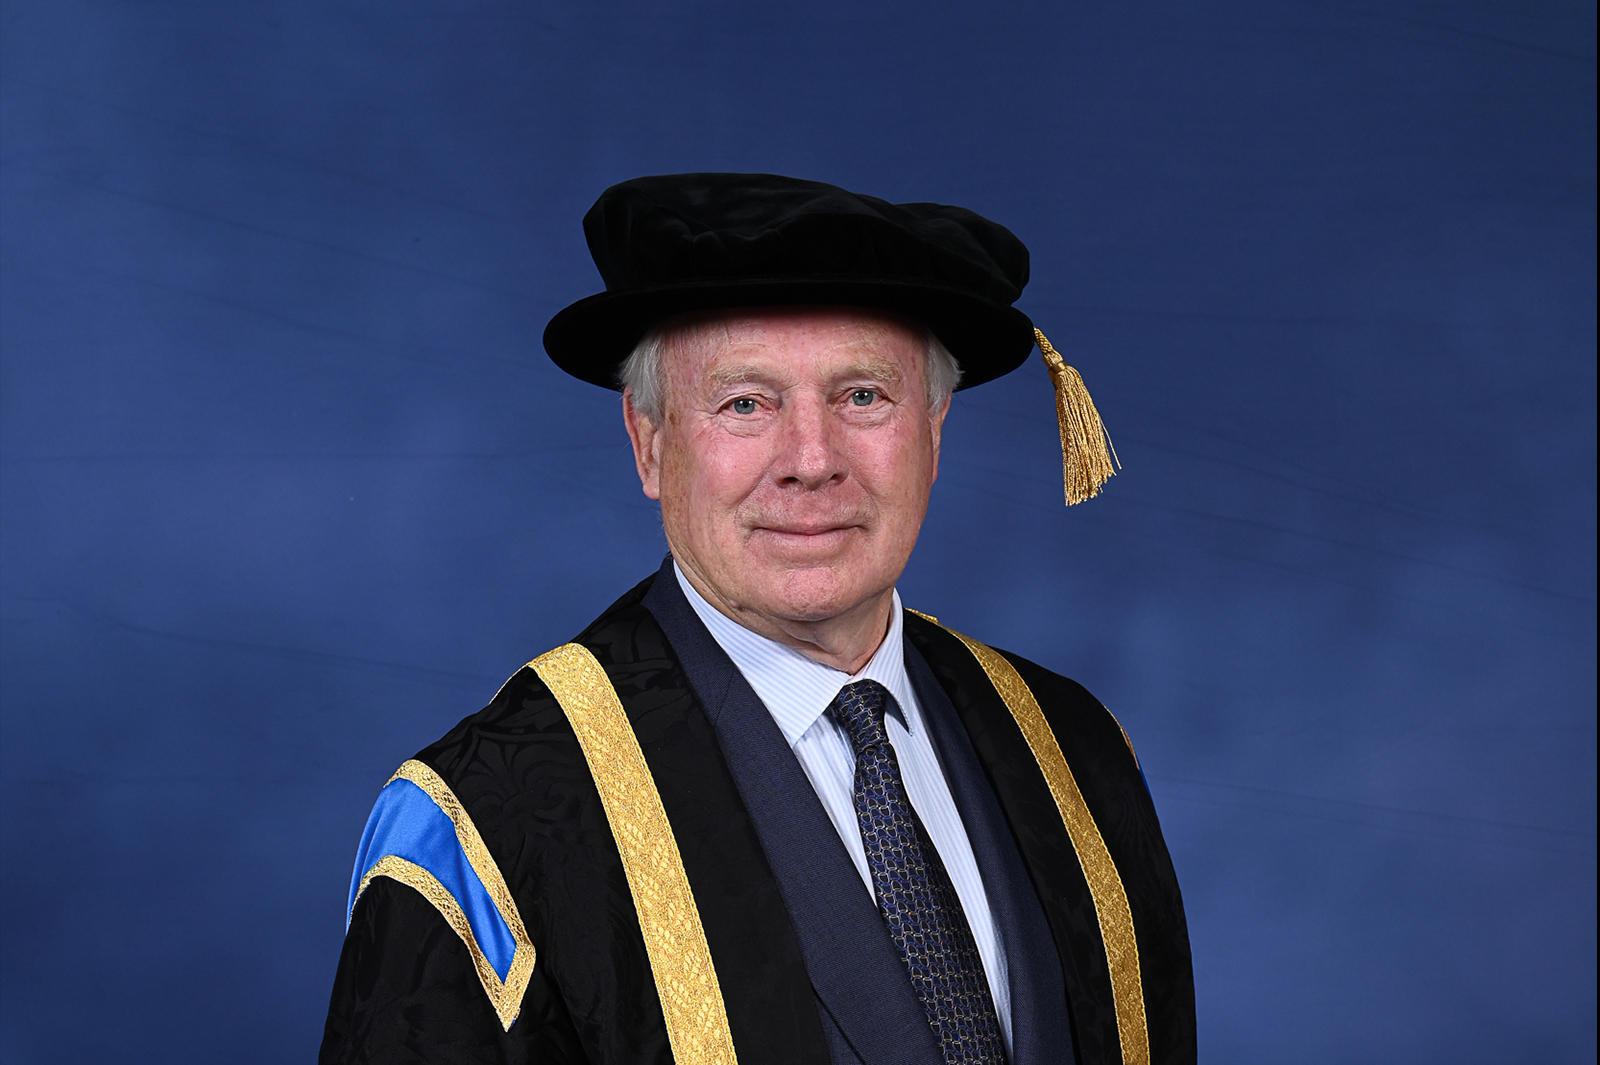 The University's Pro-Chancellor David Laing in a ceremonial gown and hat.